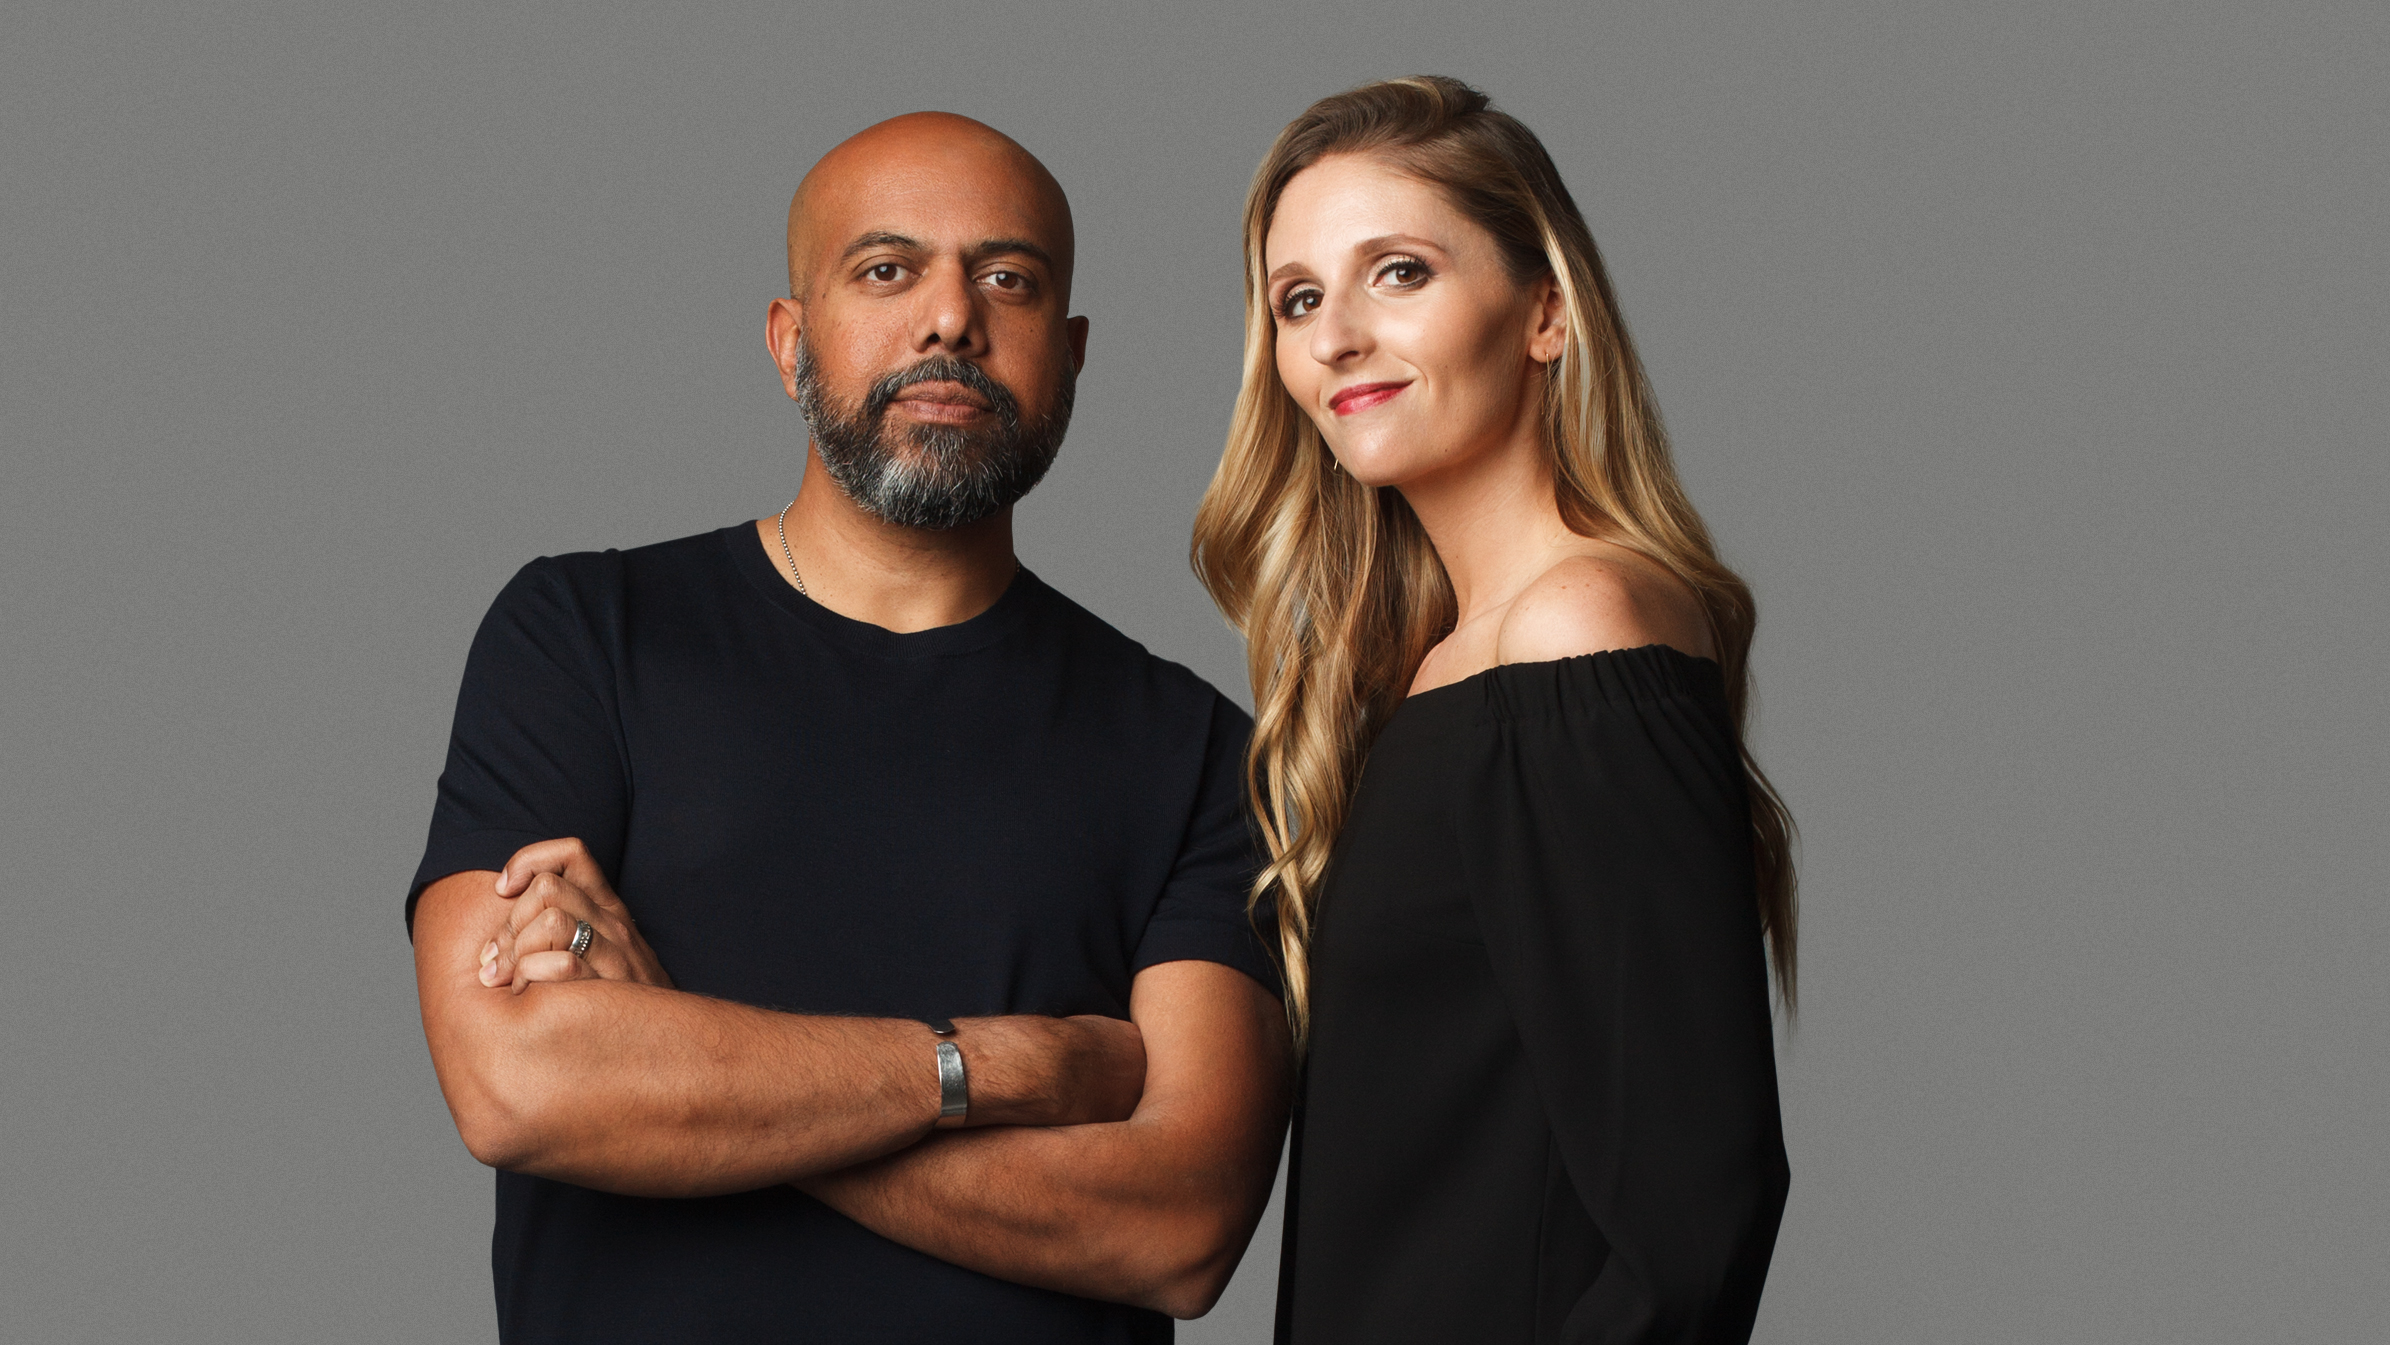 Imran Chaudhri spent two decades at Apple, working alongside Steve Jobs. It was at Apple where he met Bethany Bongiorno, and eventually, they would be